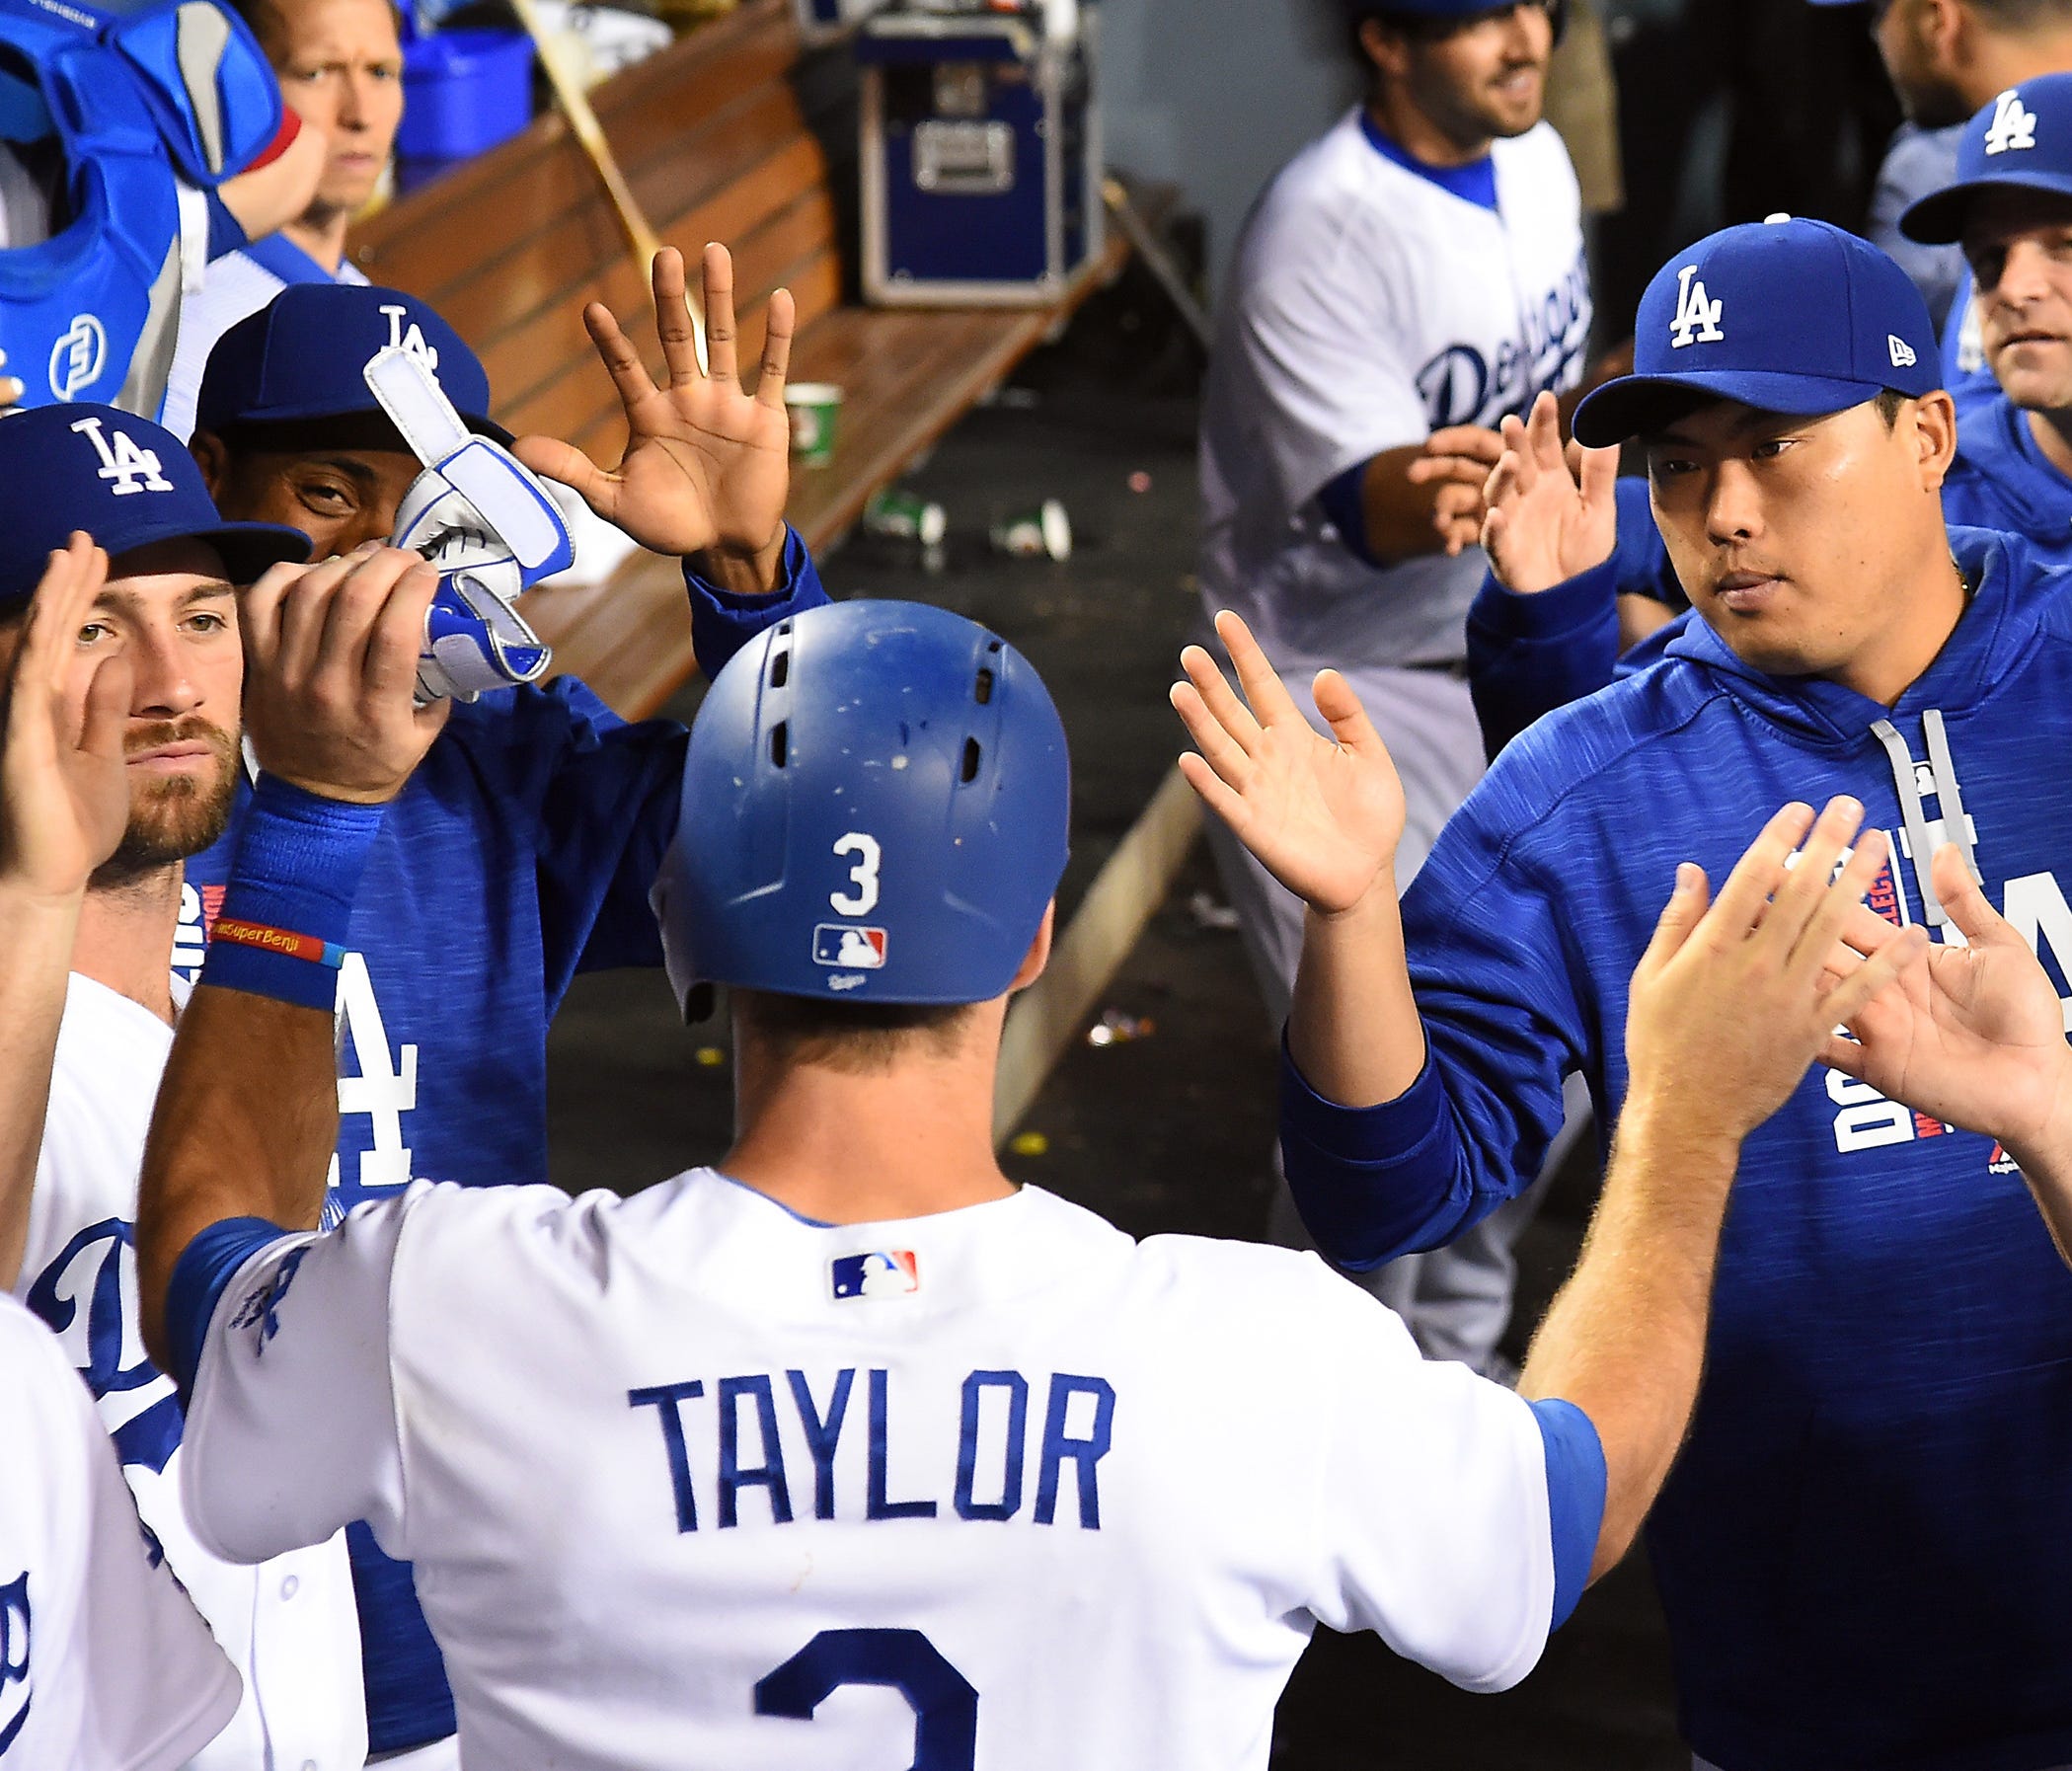 Chris Taylor and Co. are dominant at Dodger Stadium, posting a 54-24 home record.